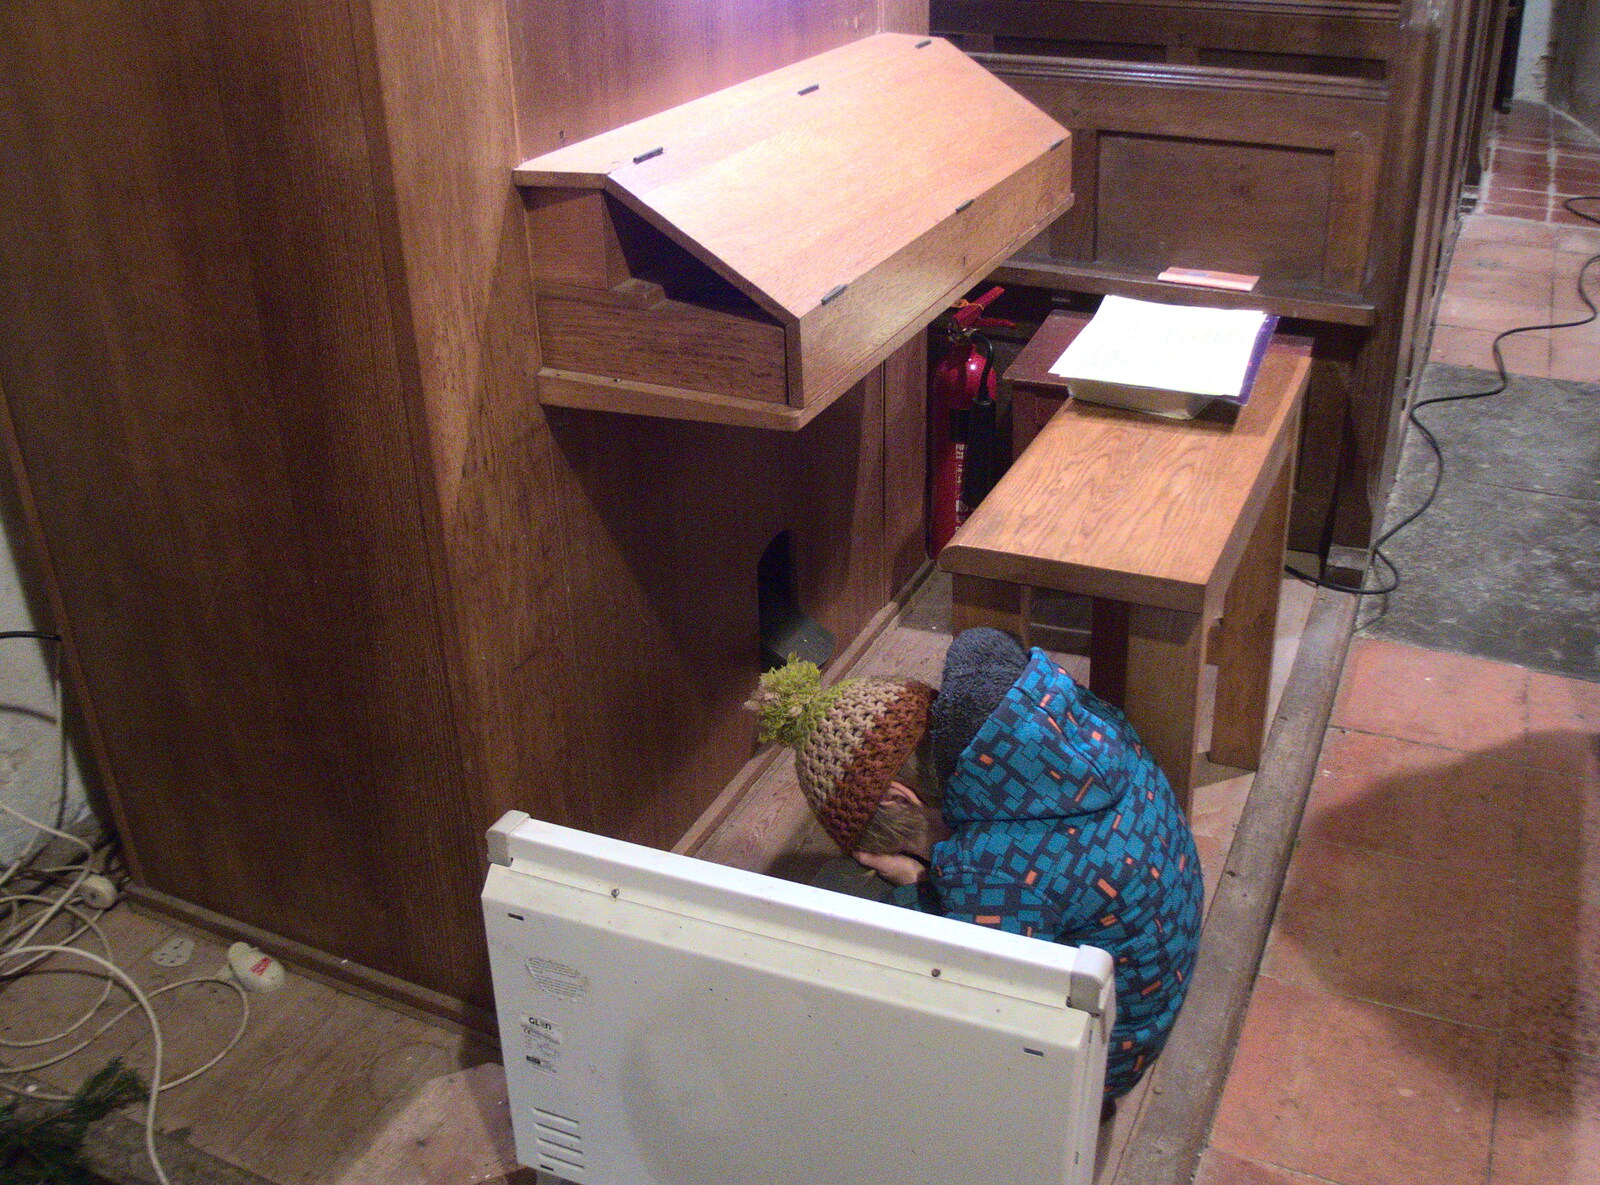 Harry's doing a not-very-well-hidden hide and seek from Christmas Carols at St. Margaret's, Thrandeston, Suffolk - 17th December 2018